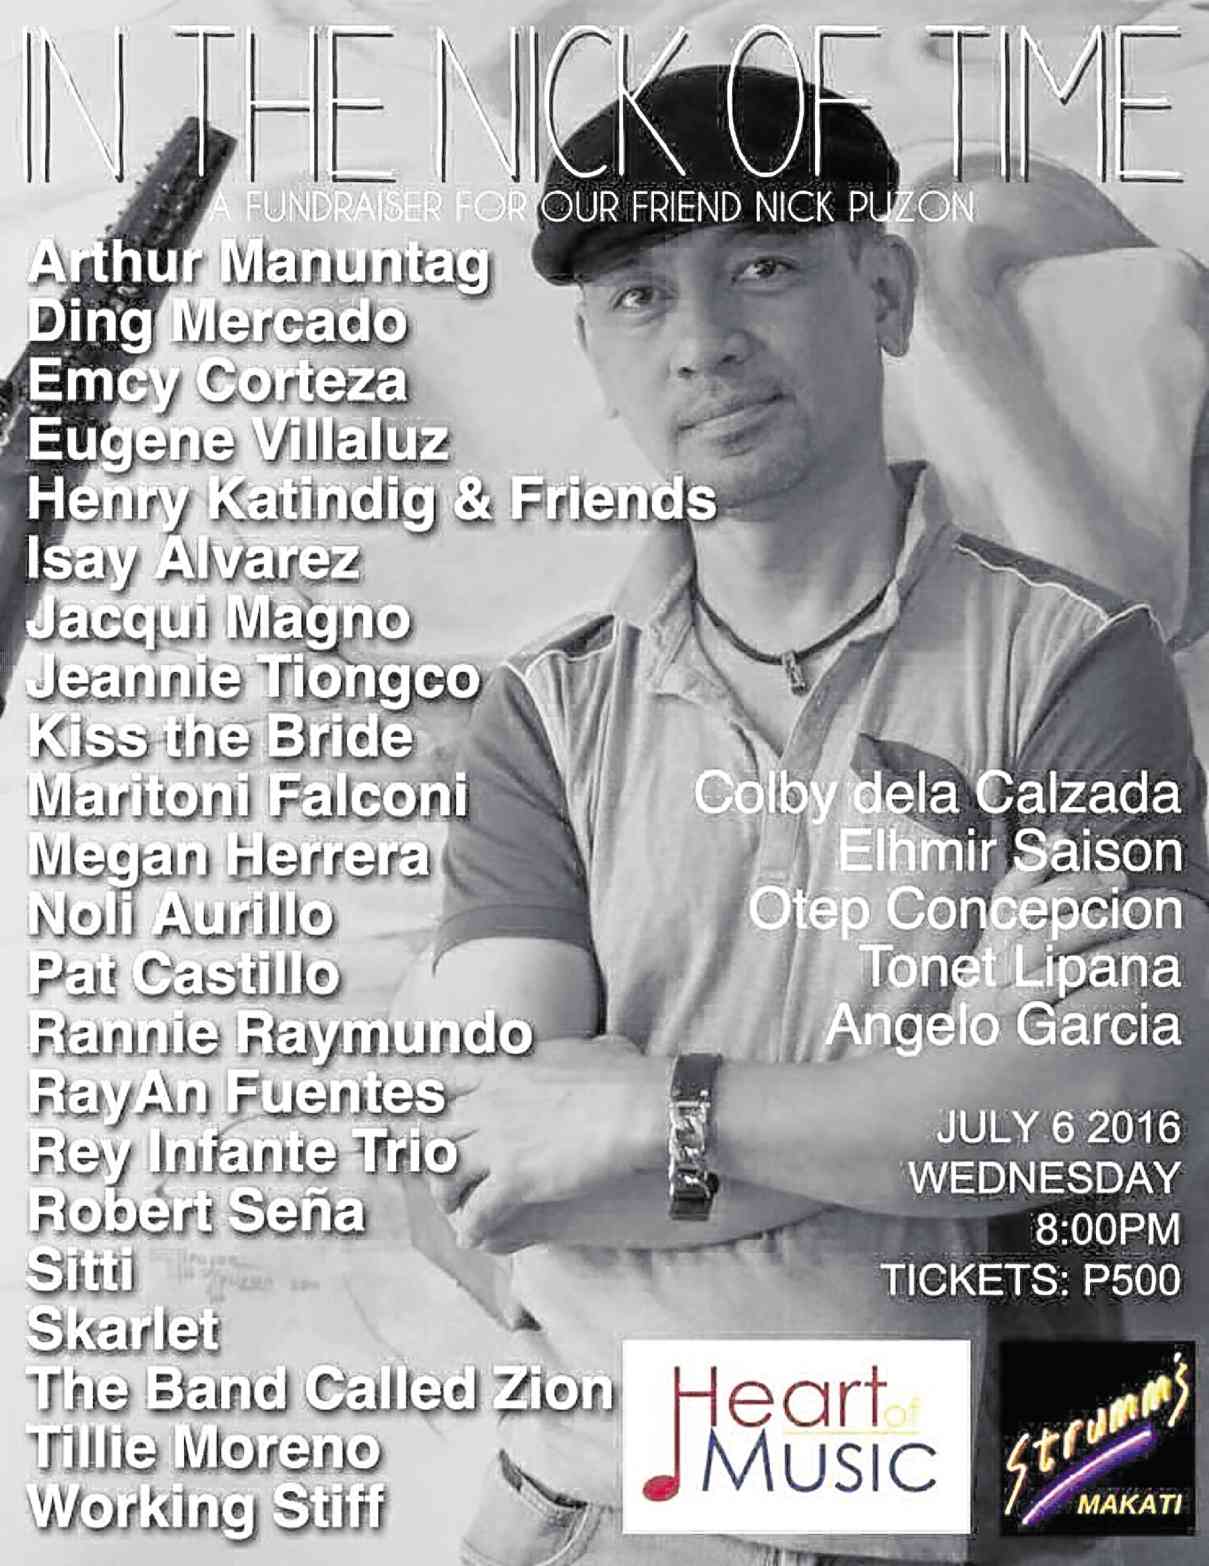 THE FUNDRAISER “In the Nick of Time” is set on July 6 at Strumm’s Makati.